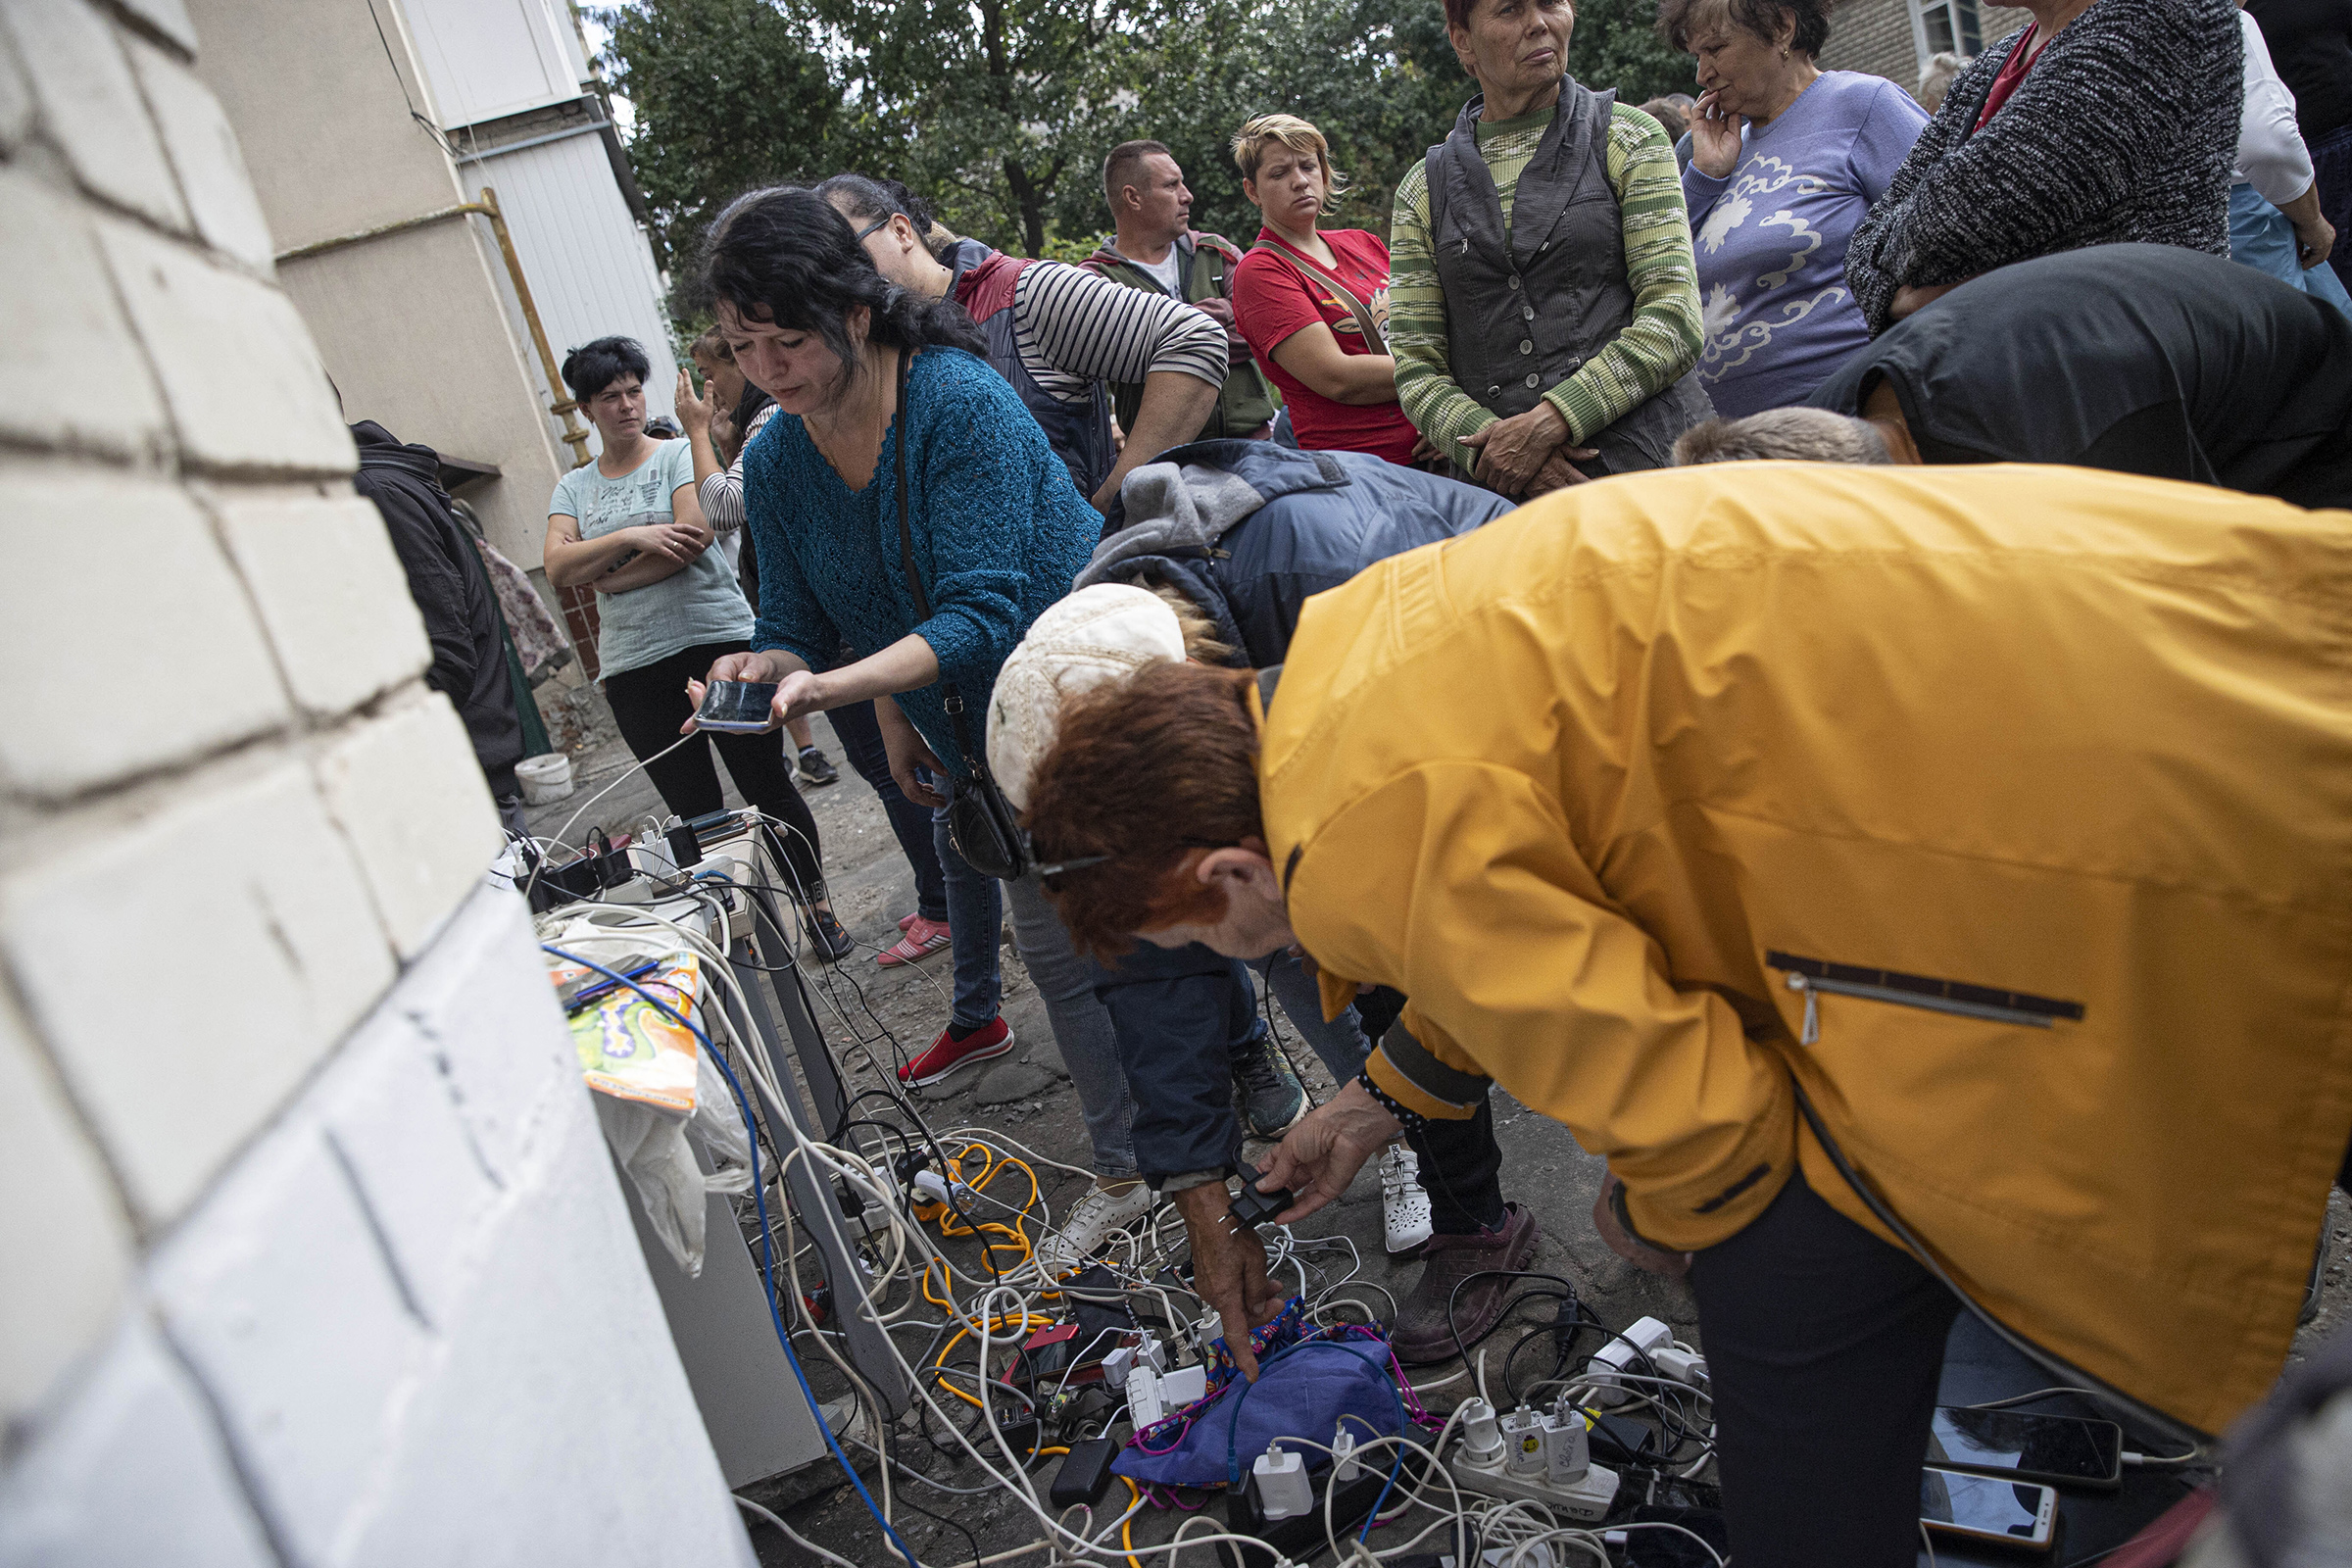 Ukrainian citizens charge their mobile phones and tablets from a generator supplied by Ukrainian soldiers after Russian Forces withdrawal from Izium as the Russia-Ukraine war continues, on Sept 18. Electricity, water and natural gas services are not available in Izium, located in Eastern Ukraine. (Metin Aktas—Anadolu Agency/Getty Images)